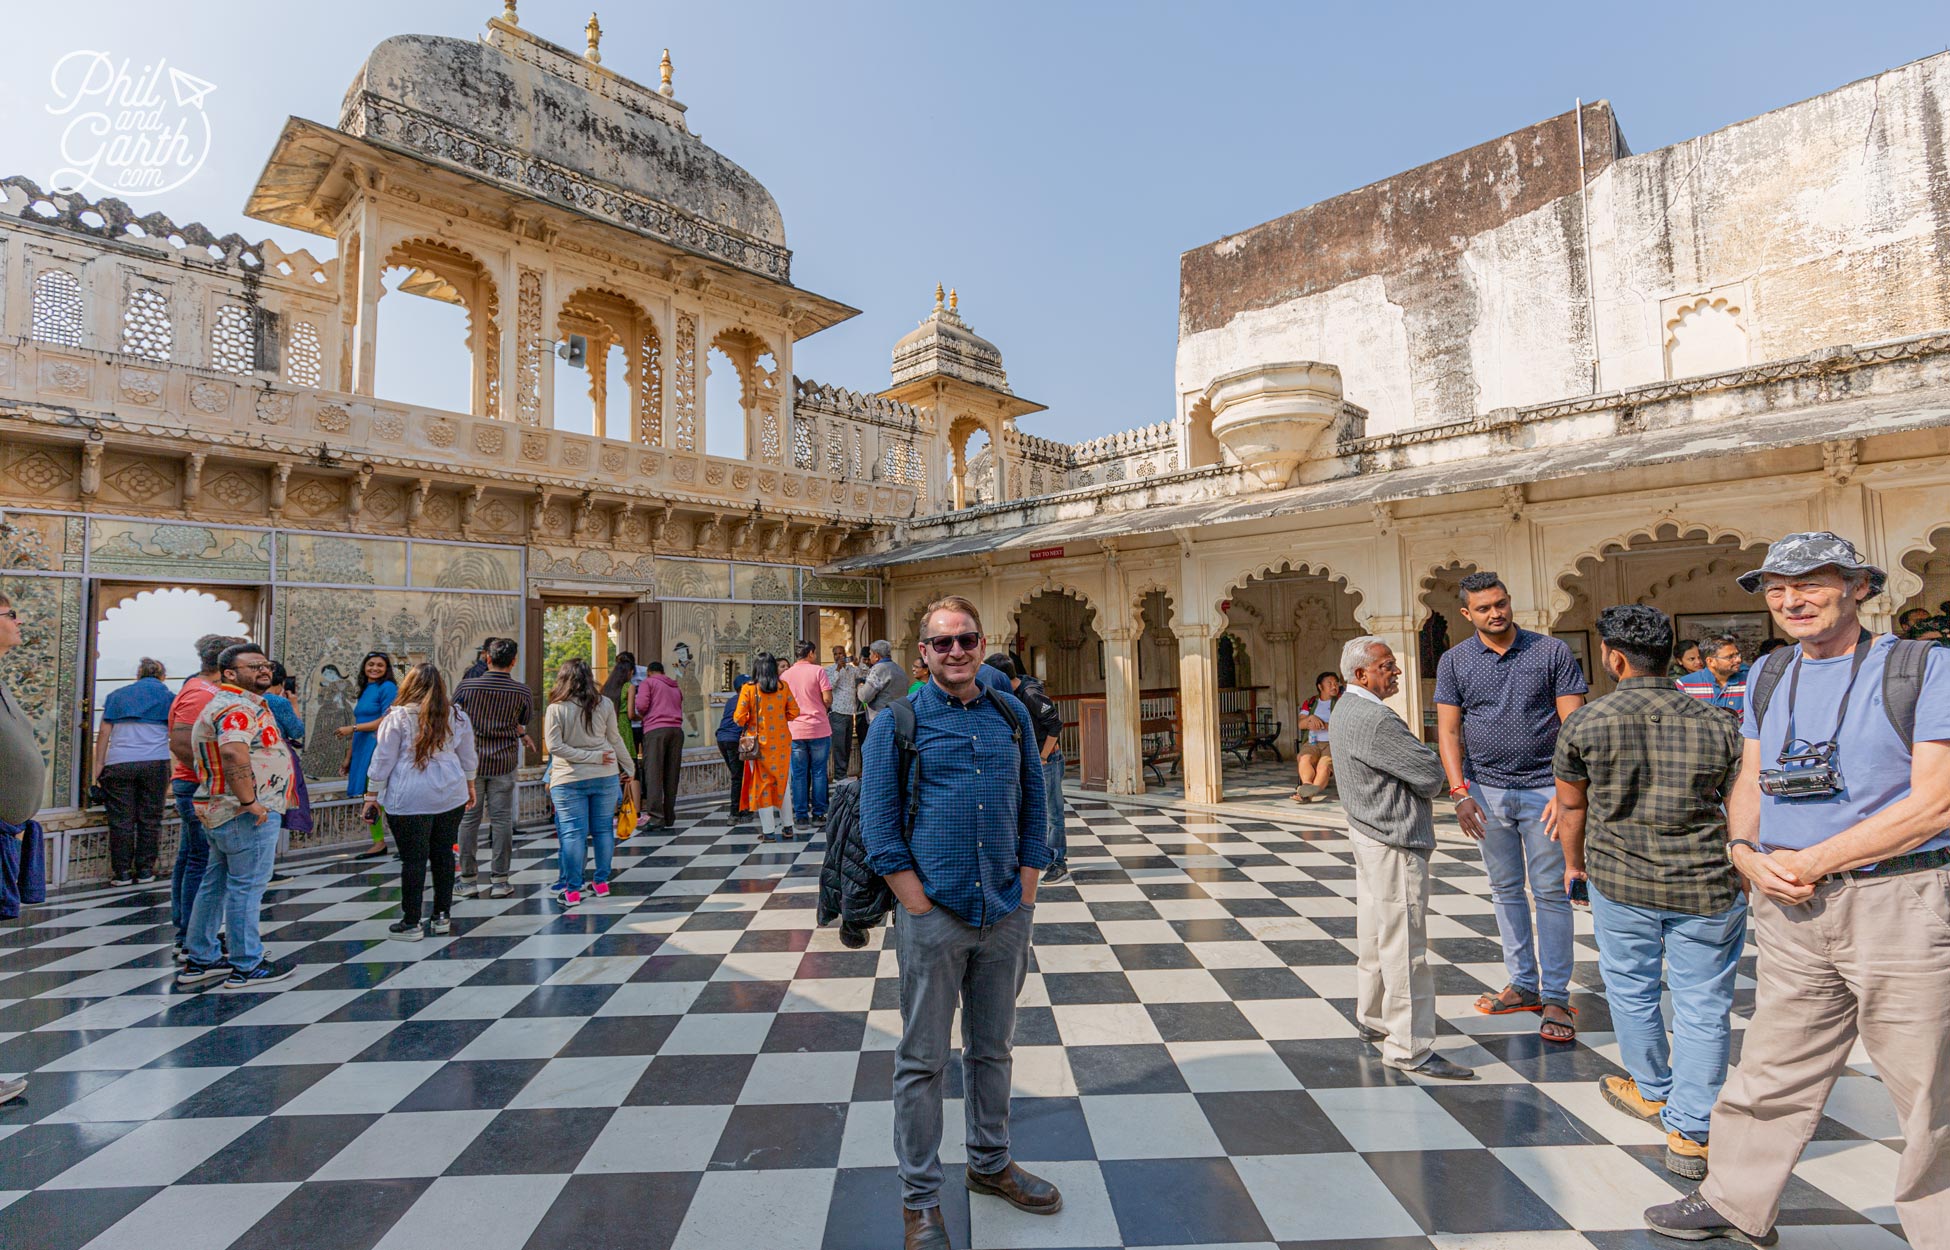 Garth in the Badi Charur Chowk palace courtyard. This area was used for music and dance